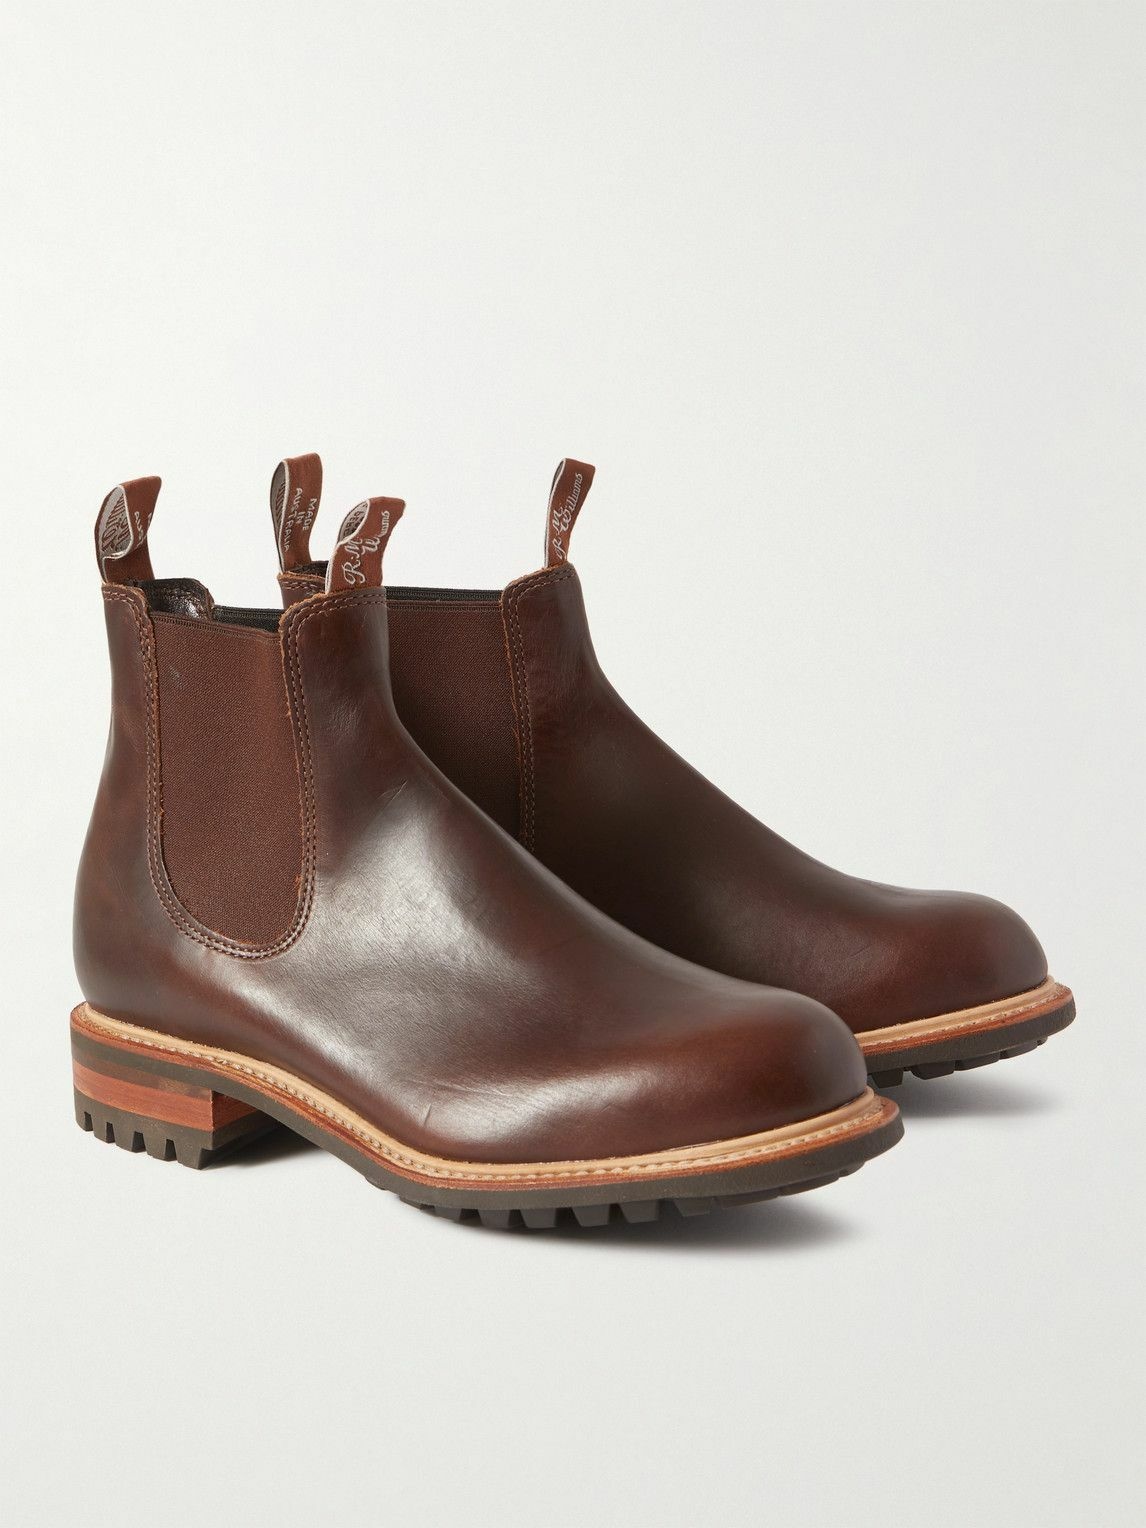 A Boot That Will Be Around For Years: R.M. Williams' Gardener